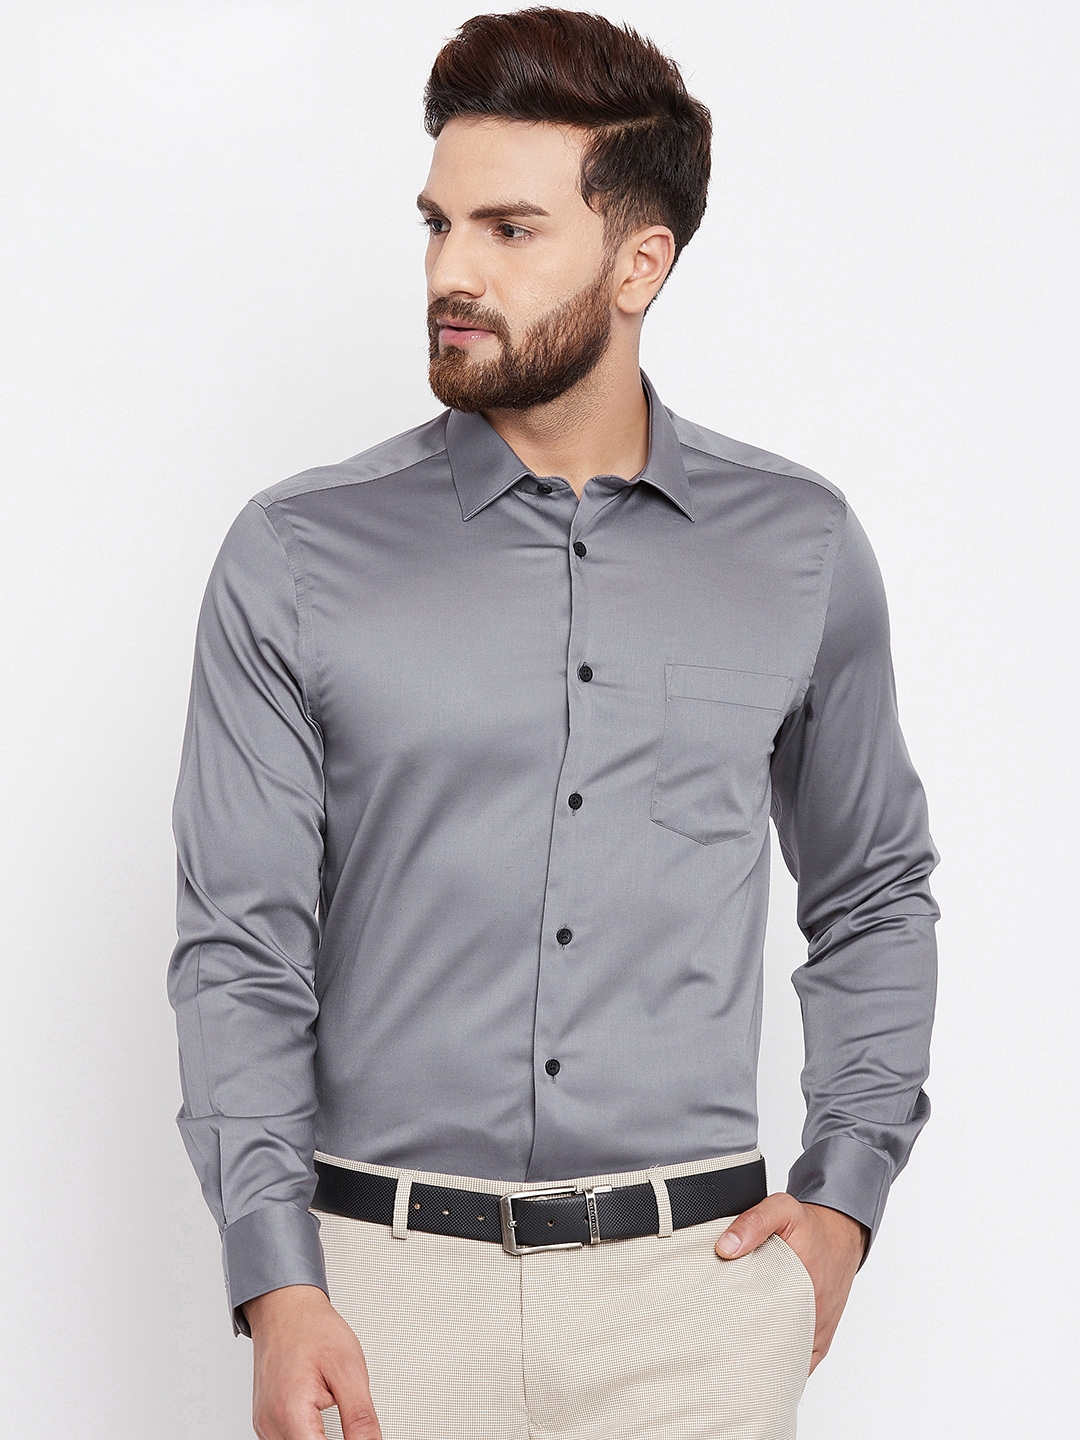 formal shirt party wear